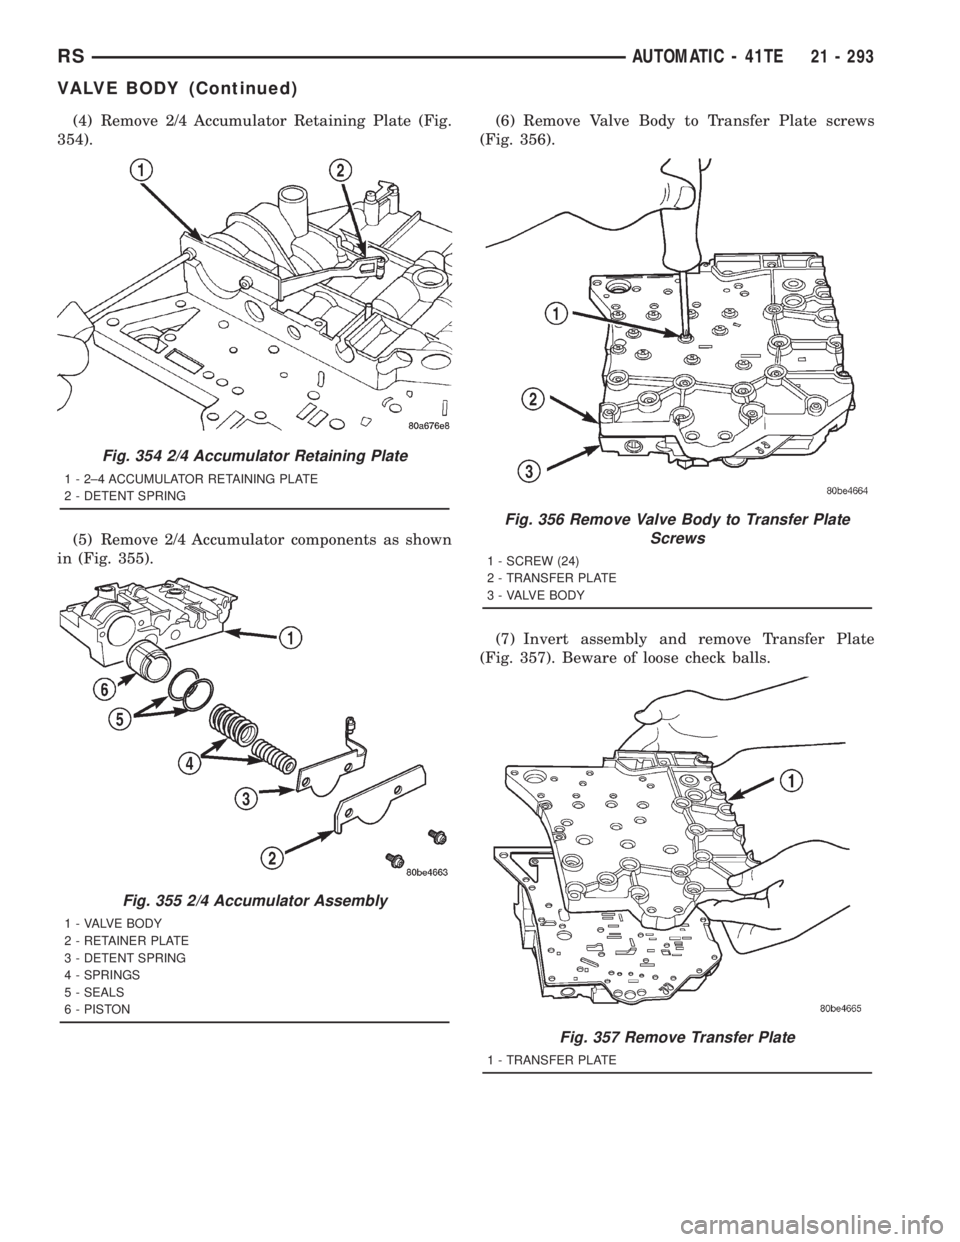 CHRYSLER VOYAGER 2001  Service Manual (4) Remove 2/4 Accumulator Retaining Plate (Fig.
354).
(5) Remove 2/4 Accumulator components as shown
in (Fig. 355).(6) Remove Valve Body to Transfer Plate screws
(Fig. 356).
(7) Invert assembly and r